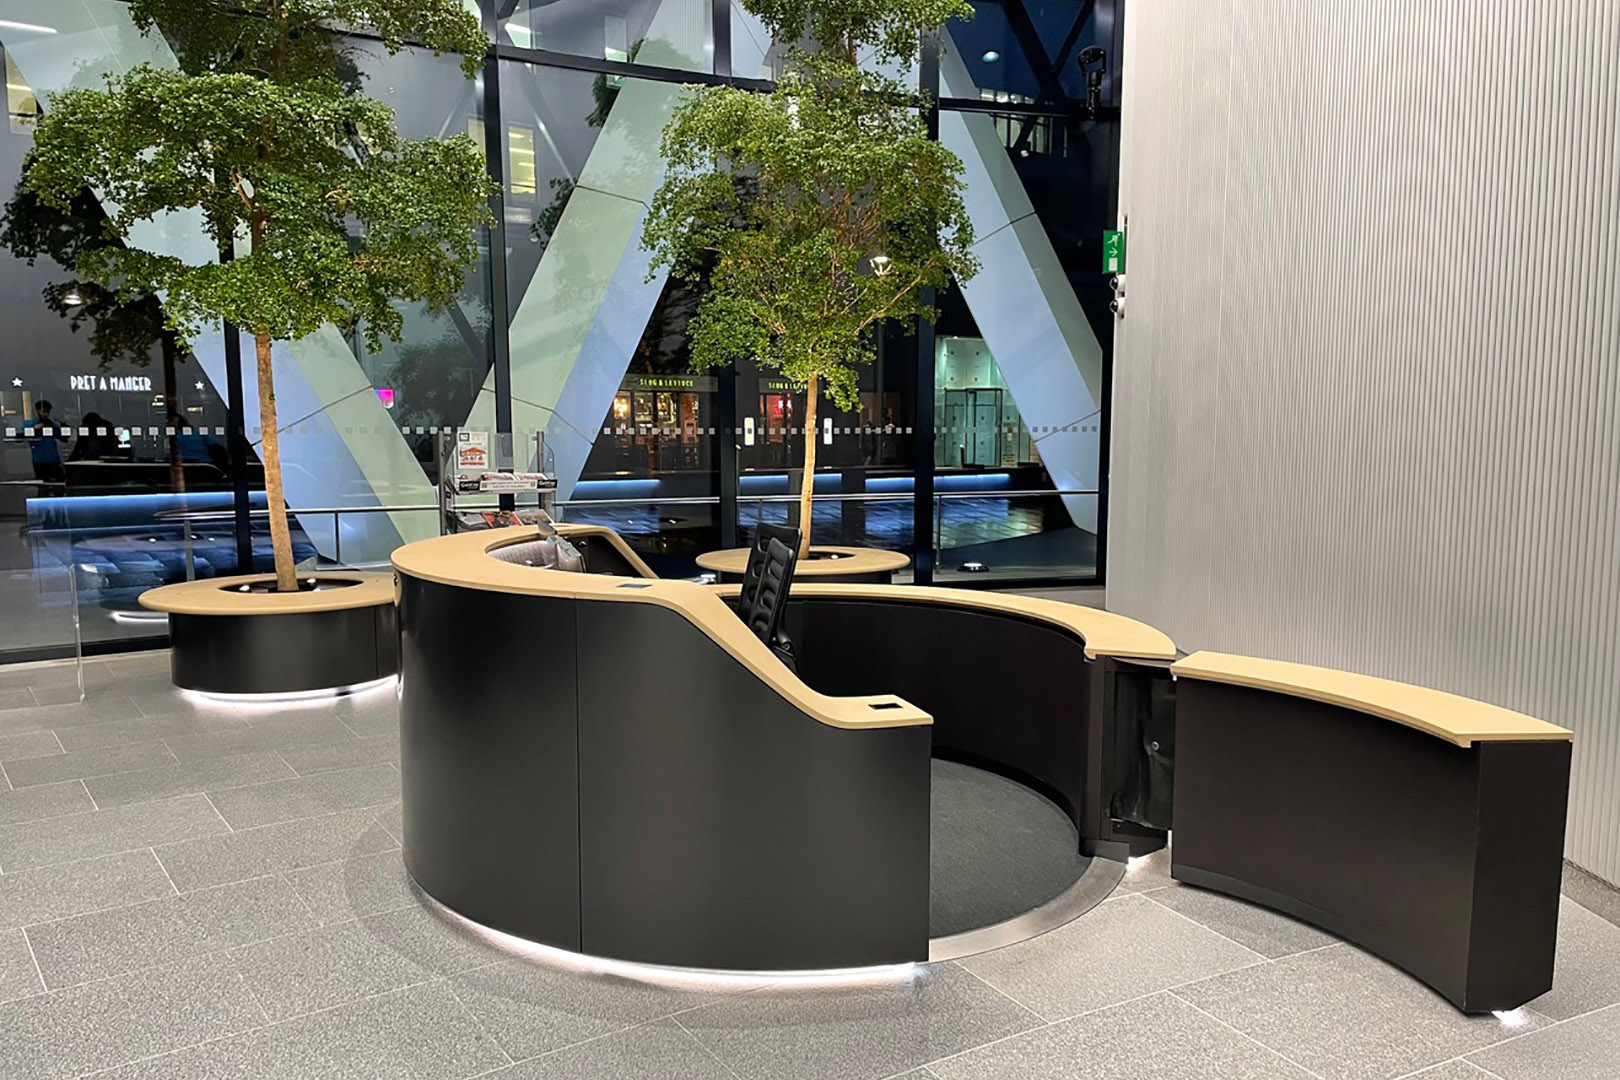 Circular black metal reception desks at the gherkin london with planters in the background